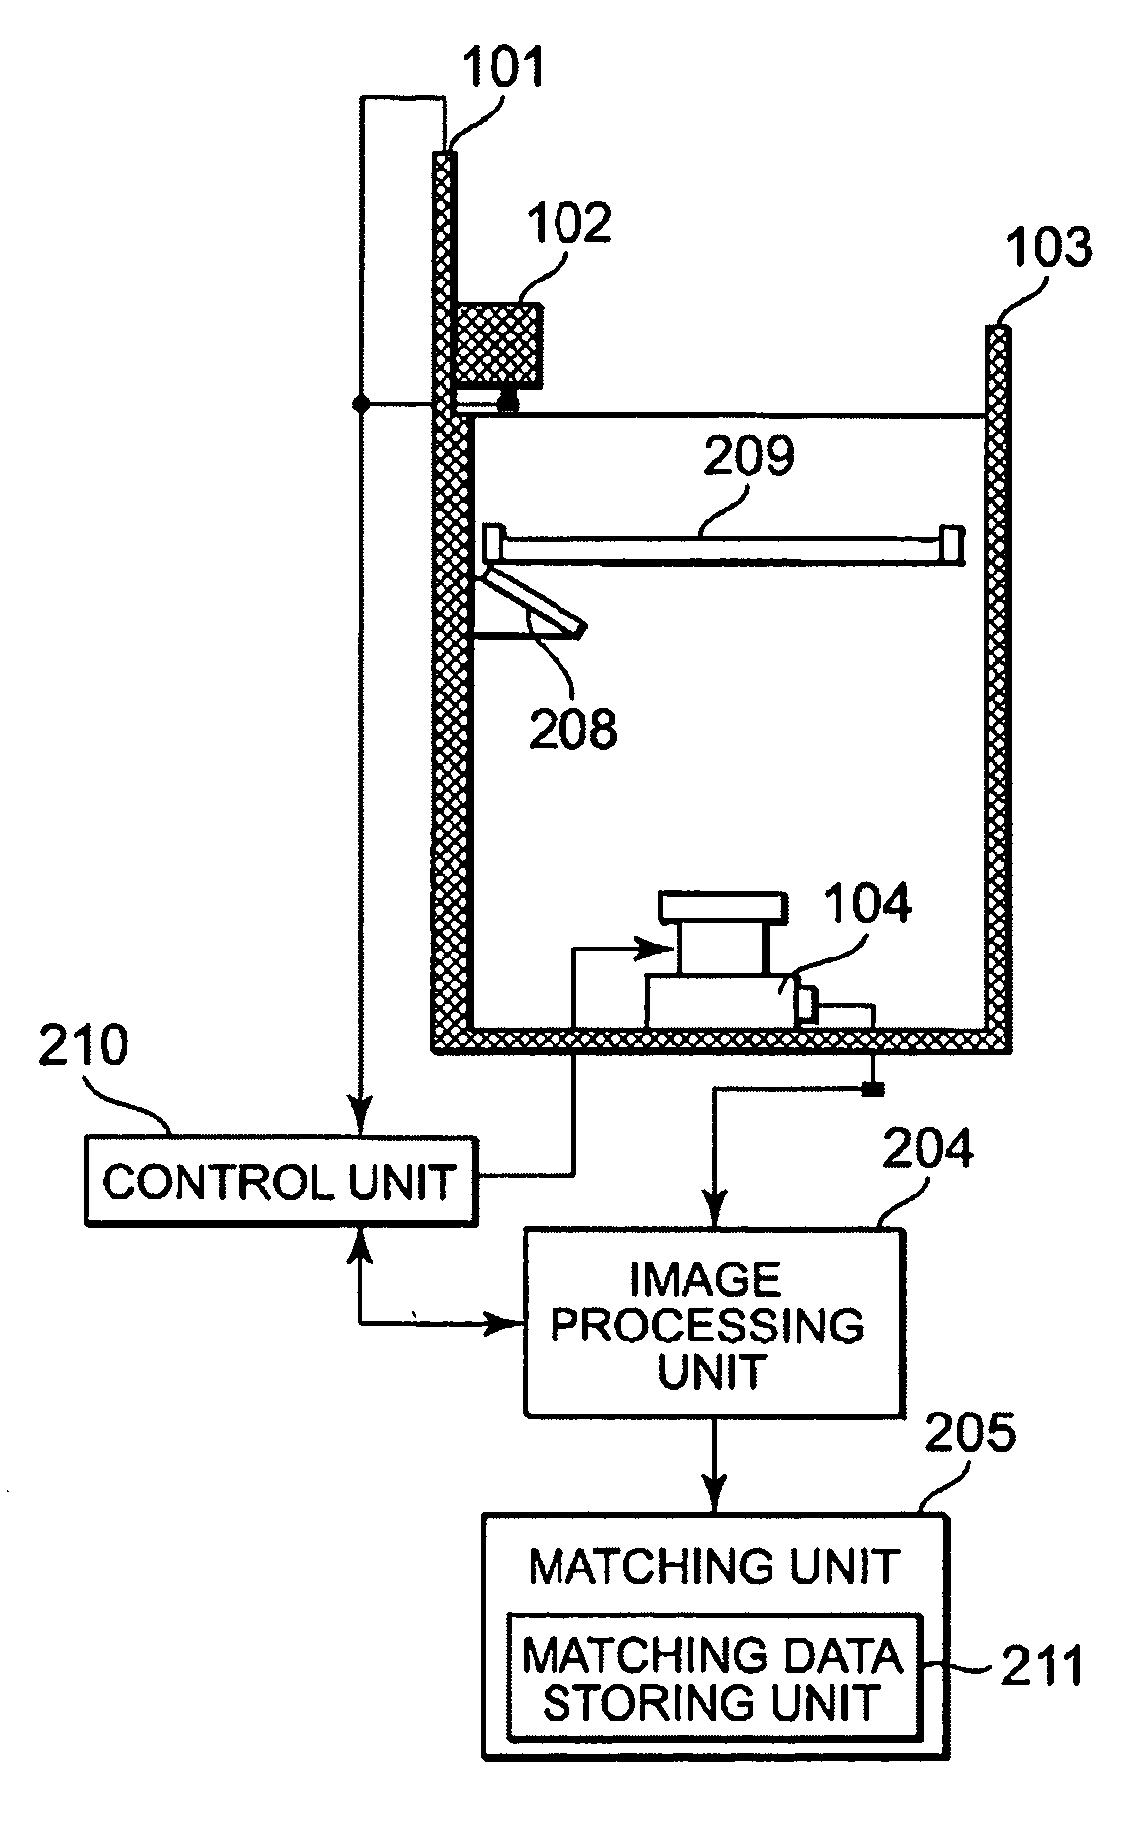 Imaging apparatus and method for authentication of user